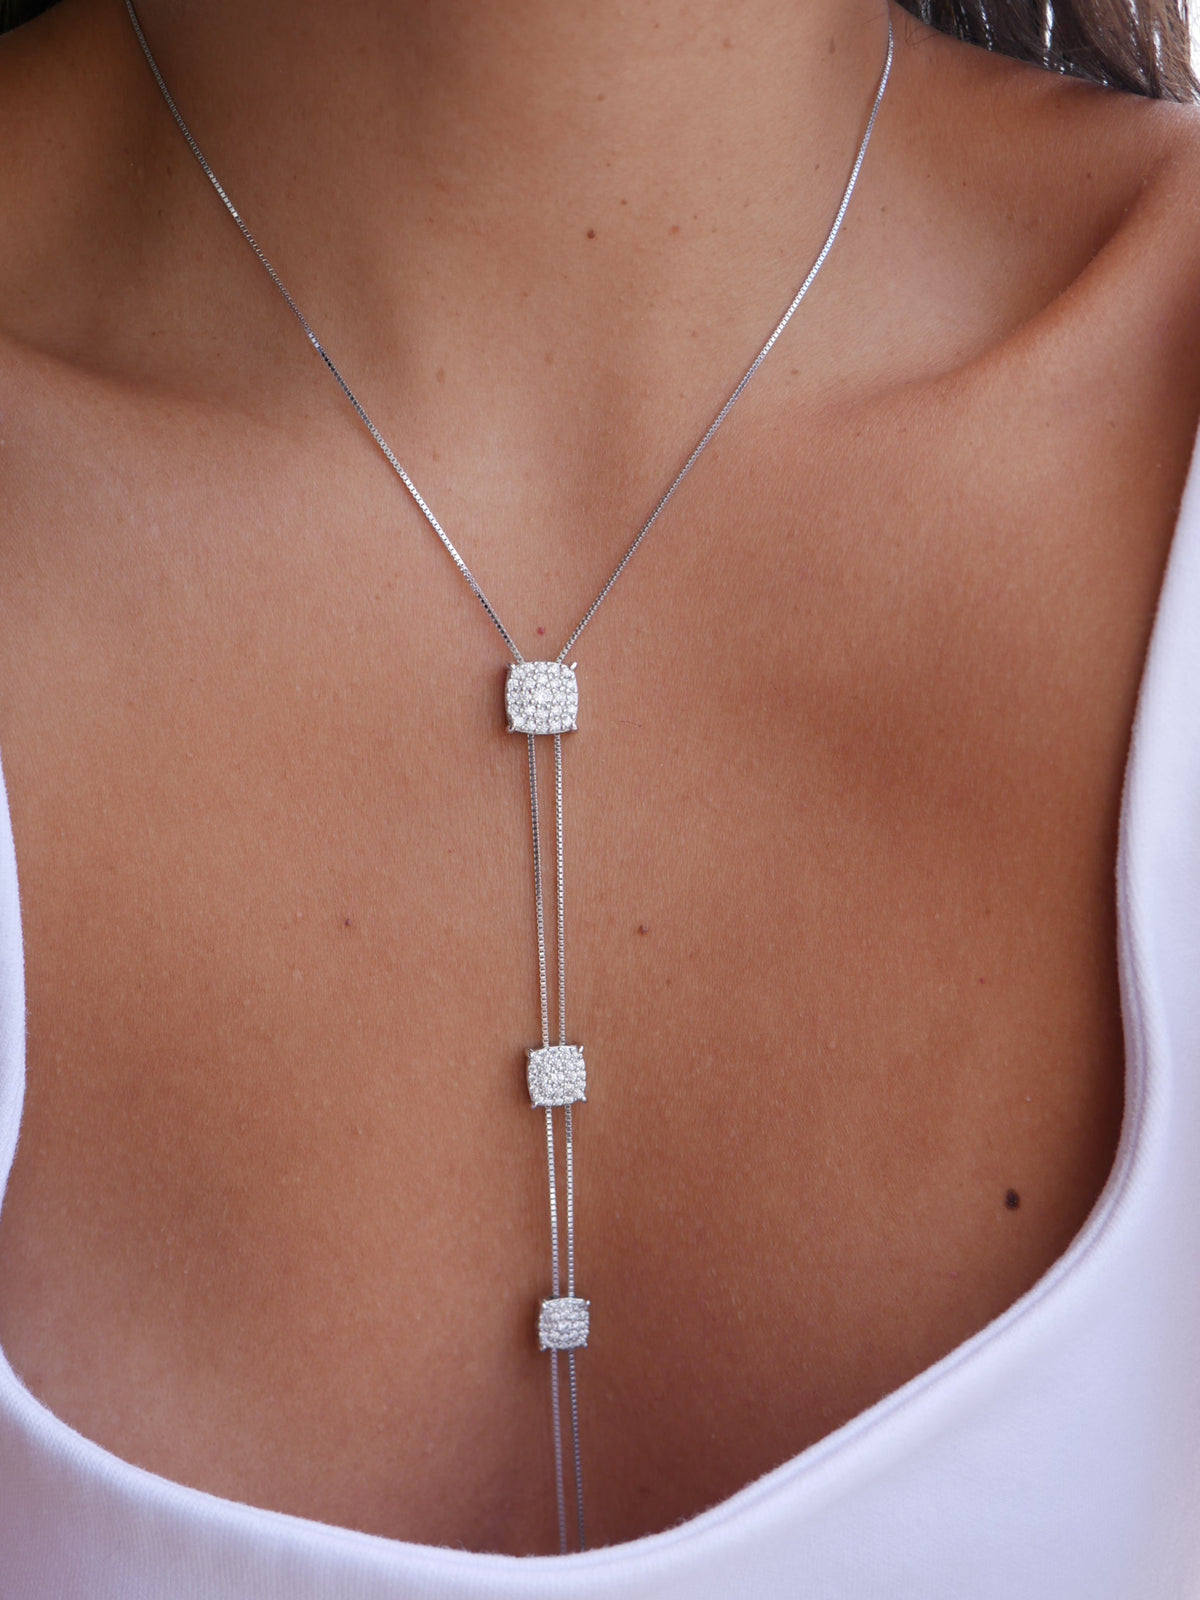 necklaces, silver necklace, 925, adjustable necklaces, lariat necklaces, lariat necklace, statement jewelry, fashion jewelry, elegant jewelry, trending on tiktok and instagram, fine jewelry, nice necklaces, sexy jewelry, cool necklaces, unique, shopping in Miami, shopping in brickell, white gold necklaces with diamonds, diamond necklace , cubic zirconia necklaces, necklaces with rhinestones, gift ideas, graduation gift, birthday gift ideas, jewelry website, nice jewelry